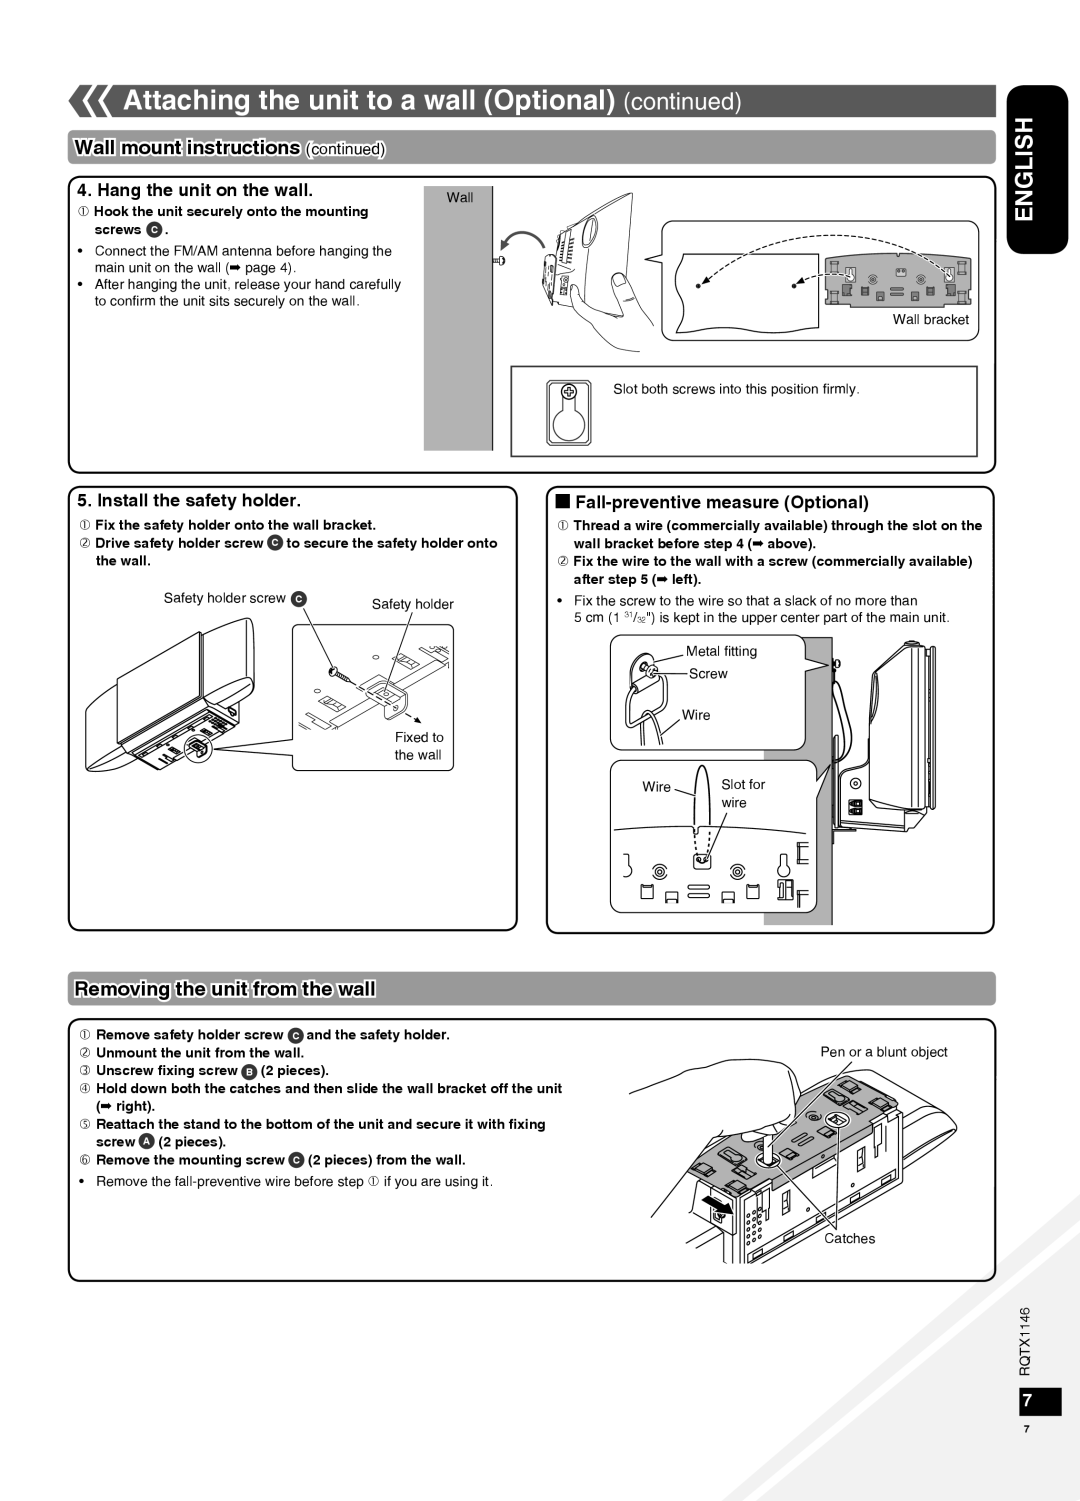 Panasonic SC-HC40 Wall mount instructions continued, Removing the unit from the wall, Hang the unit on the wall, English 